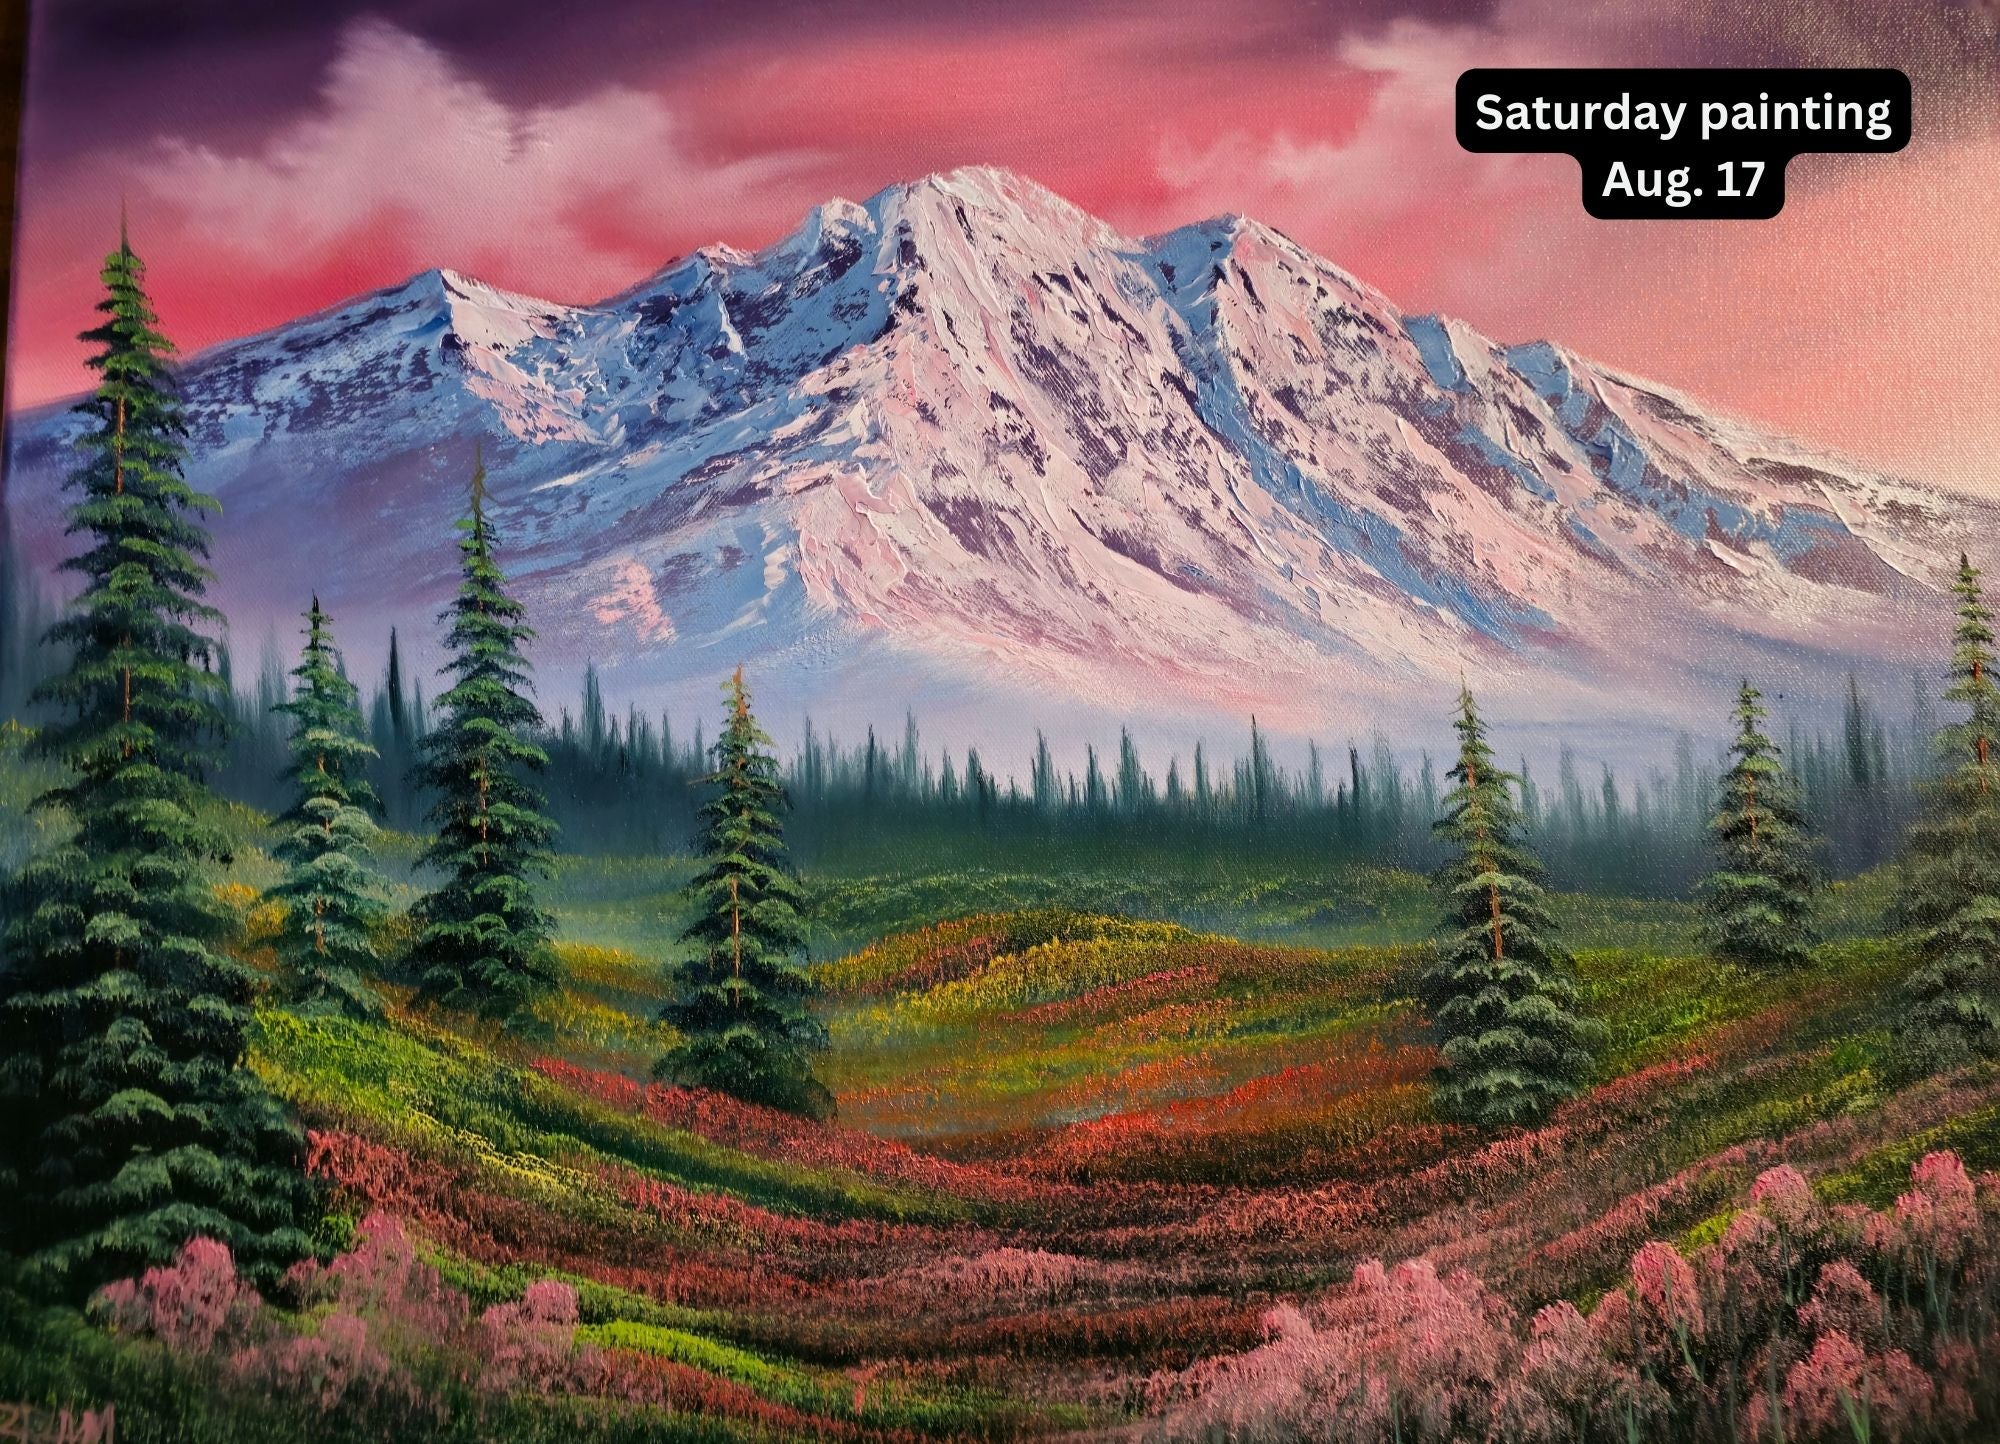 Bob Ross Painting Workshops with Certified Instructor Bram Bevins